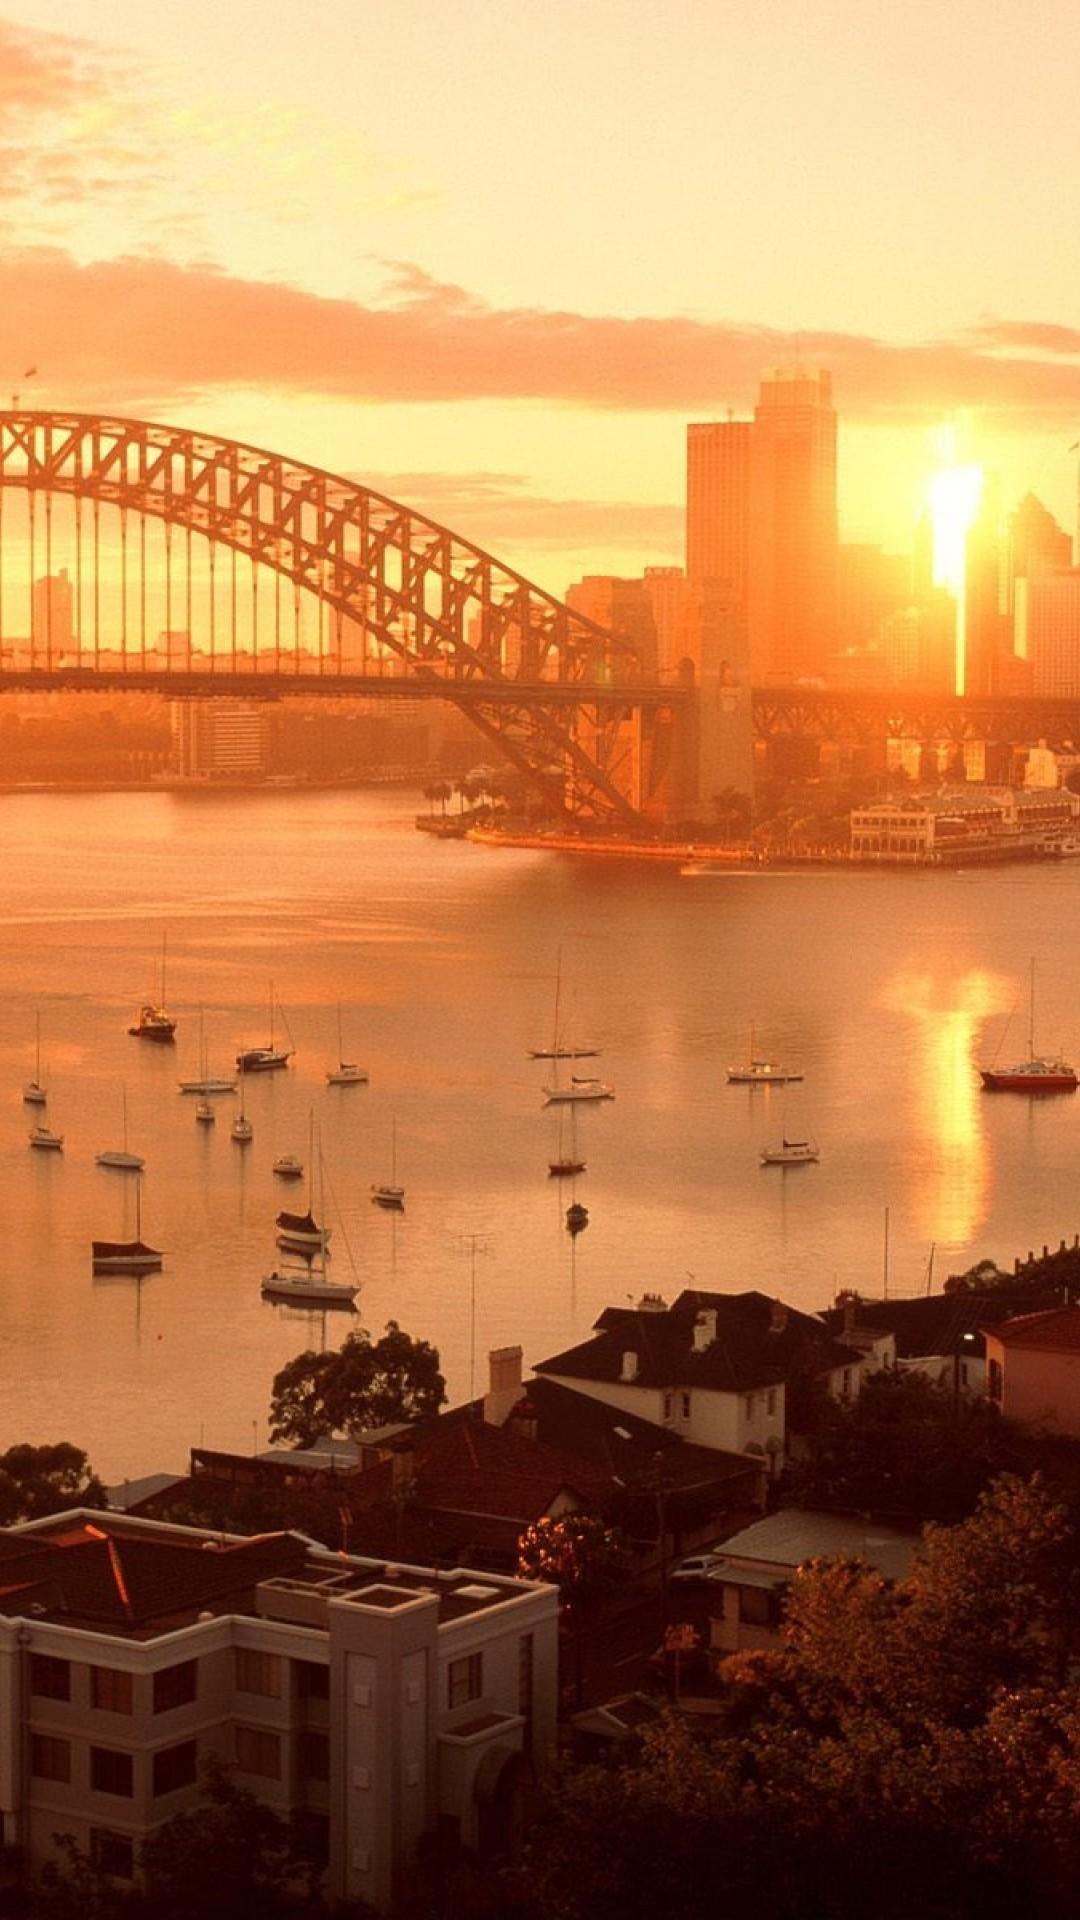 Sydney iPhone Wallpapers - Top Free Sydney iPhone Backgrounds ...